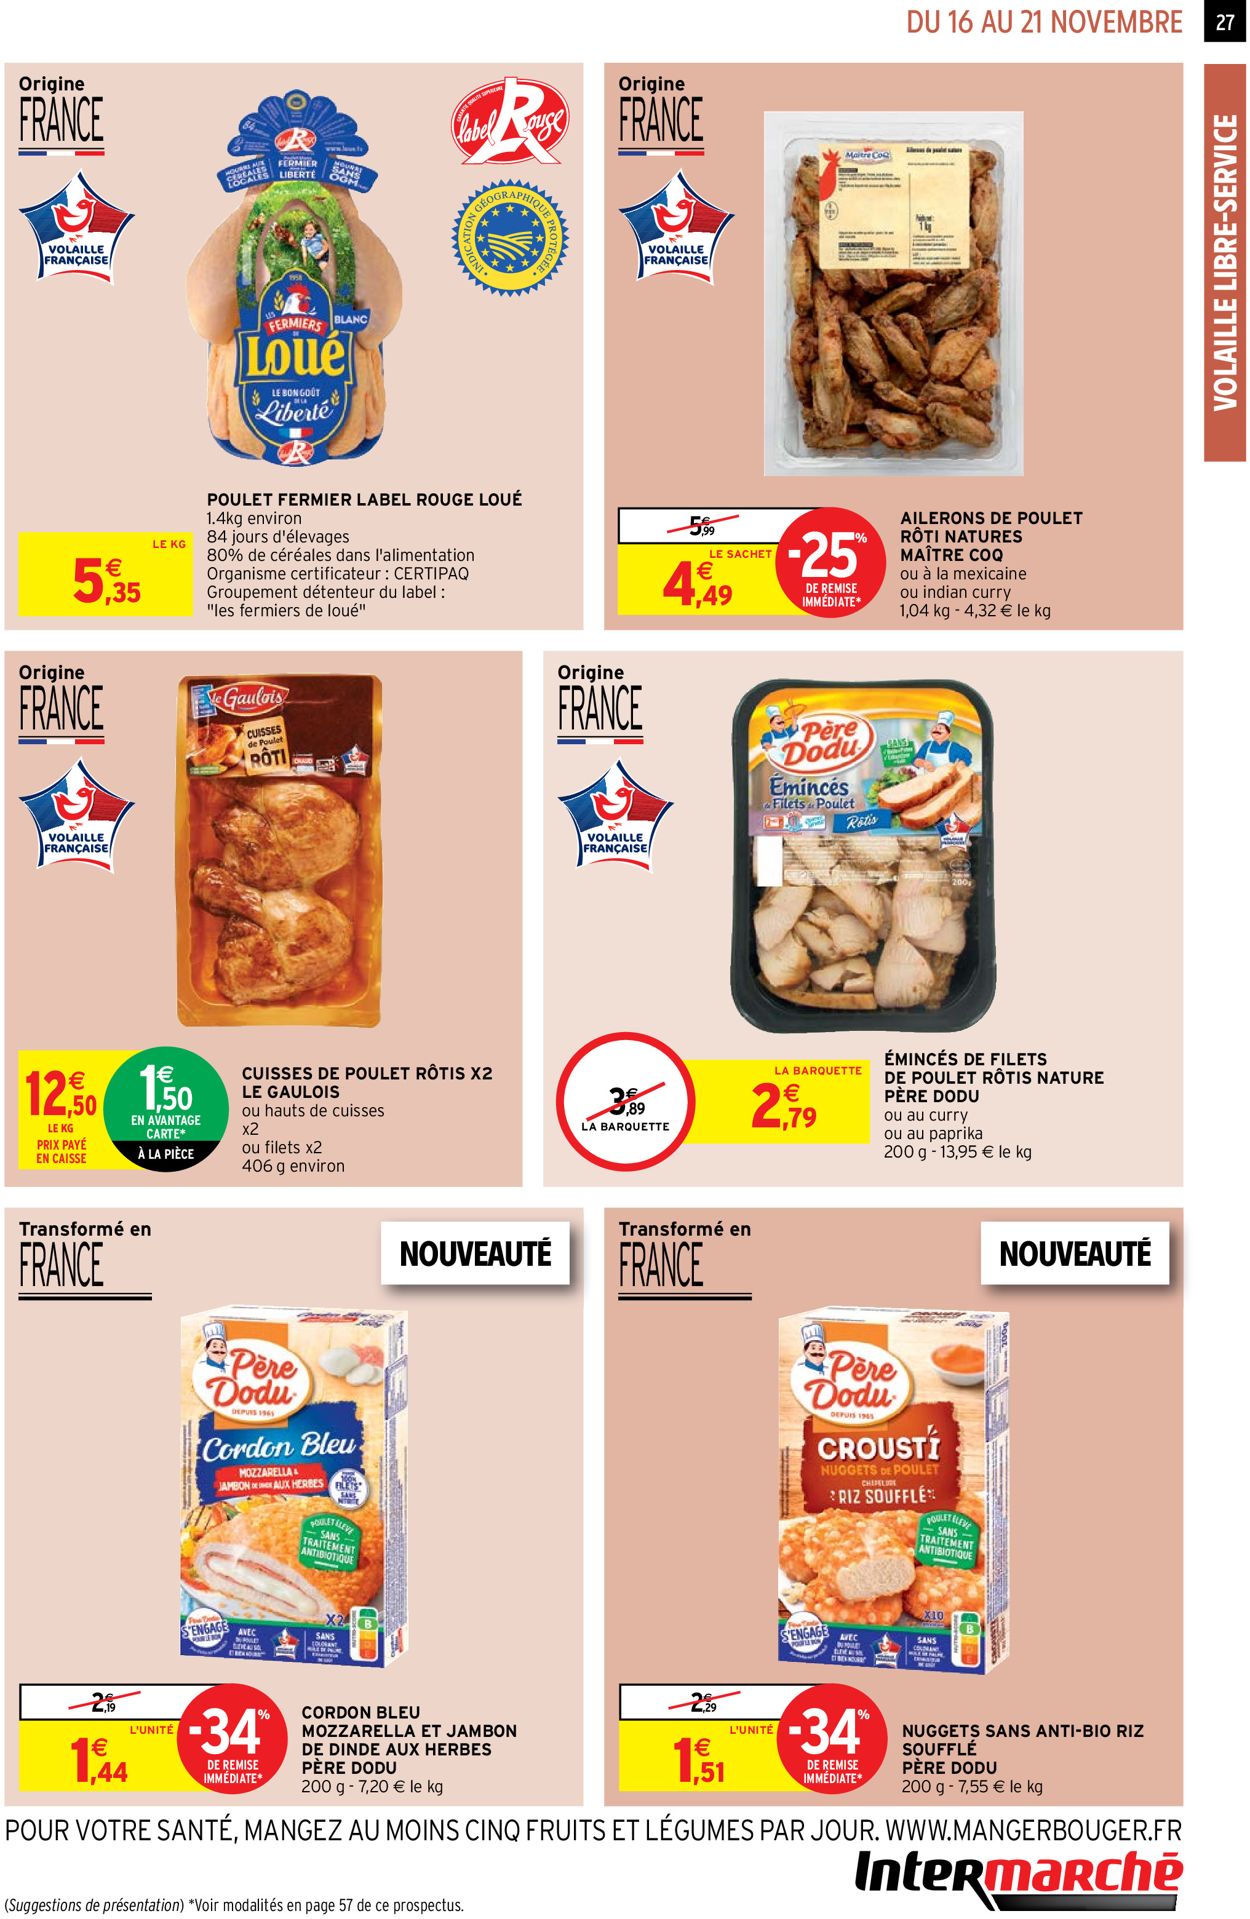 Intermarché  BLACK FRIDAY 2021 Catalogue - 16.11-21.11.2021 (Page 27)